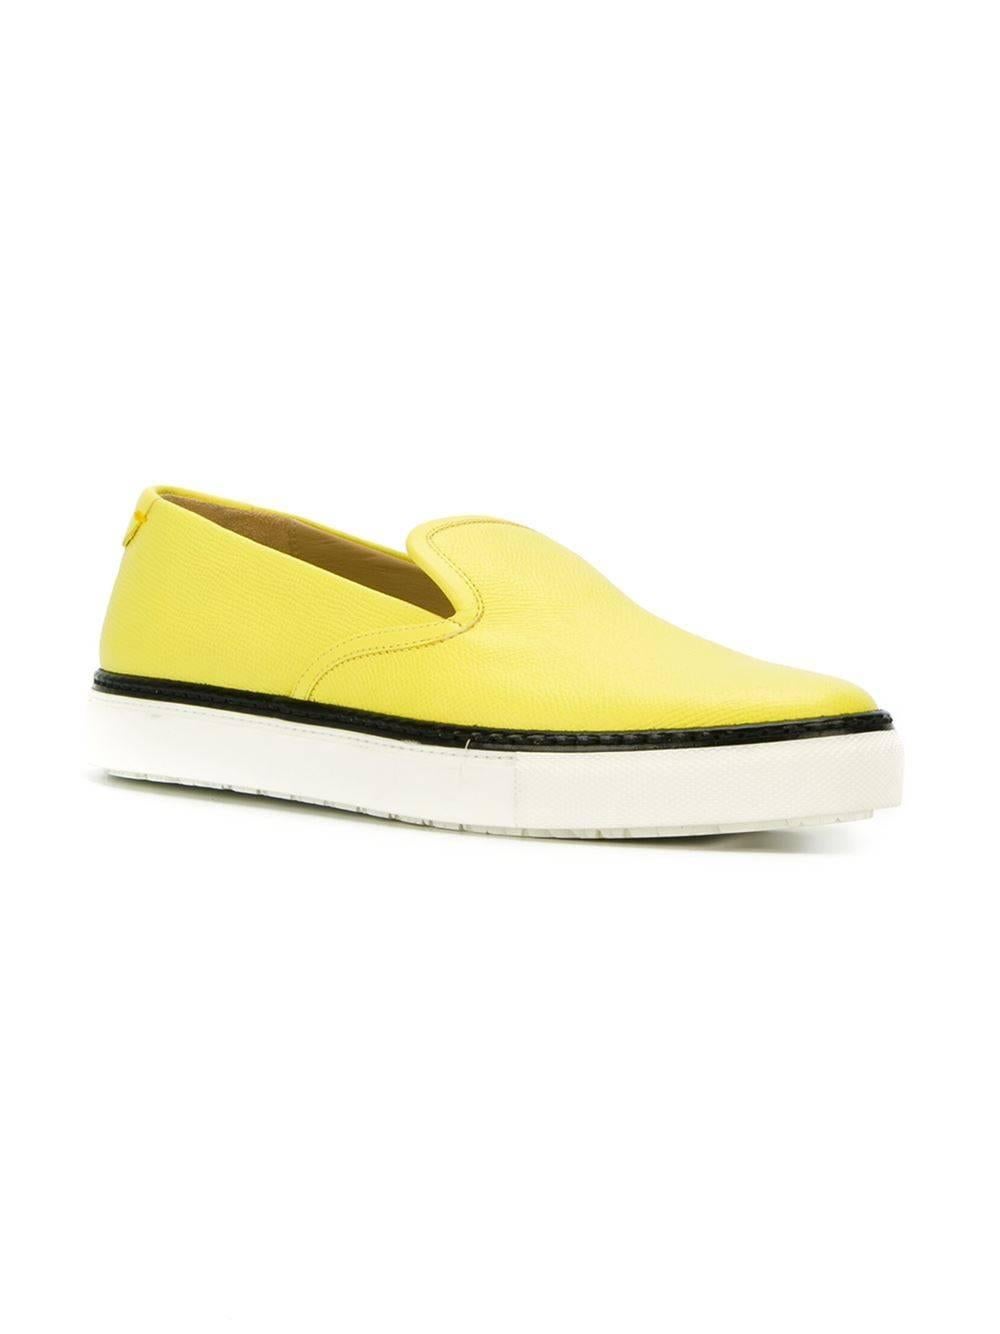 Yellow leather slip-on sneakers featuring an almond toe, a brand embossed insole, a contrast piped trim, a back embossed logo stamp and a flat rubber sole.

Colour: Yellow

Material: Leather 100%

Measurements: Wedge: 3.2cm, Size: EU